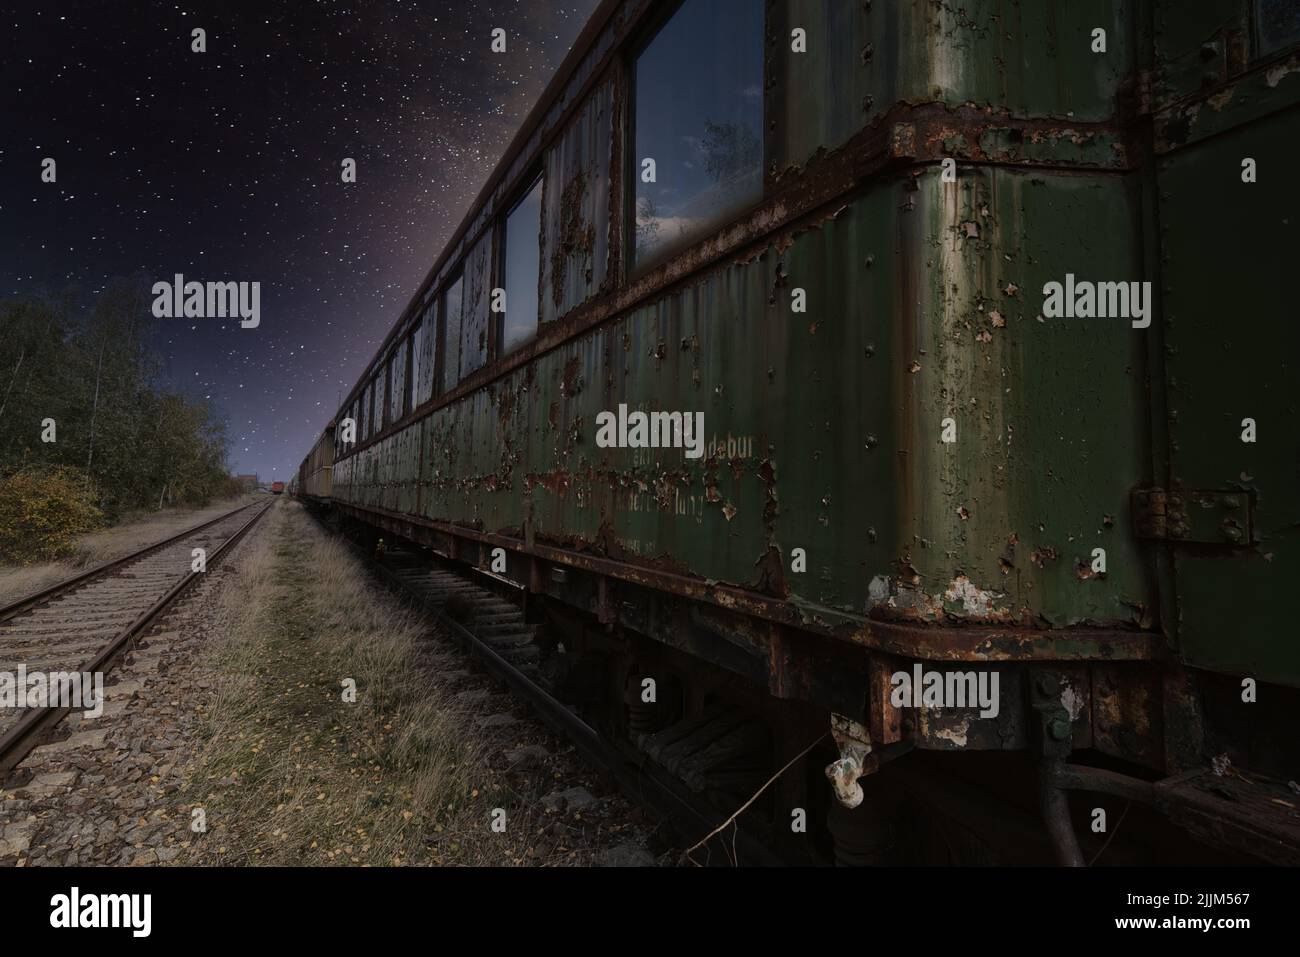 The old dark green train car against the background of starry sky. Stock Photo